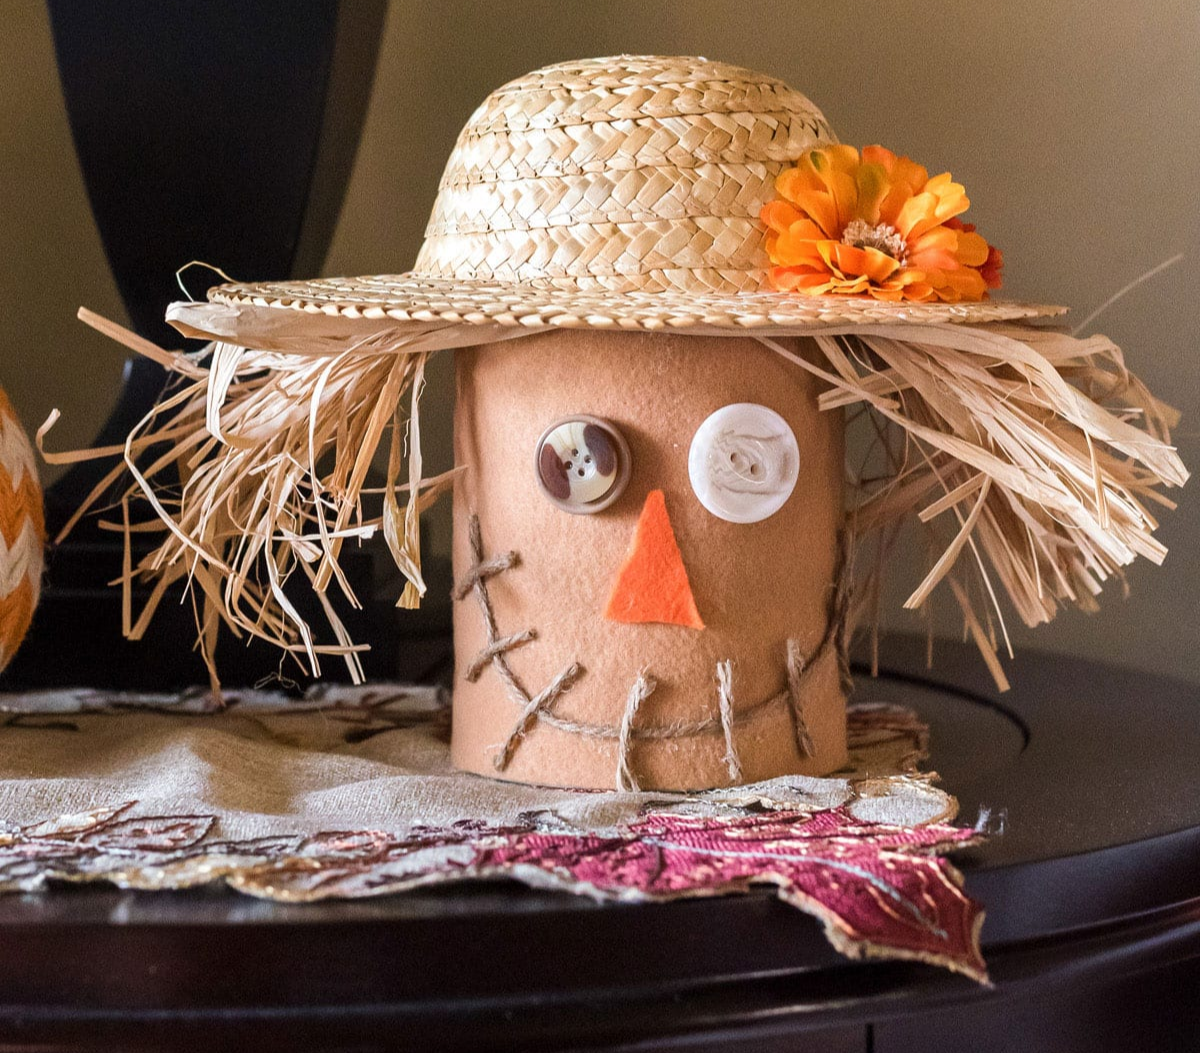 Image of a scarecrow head made from an upside down and decorated coffee can